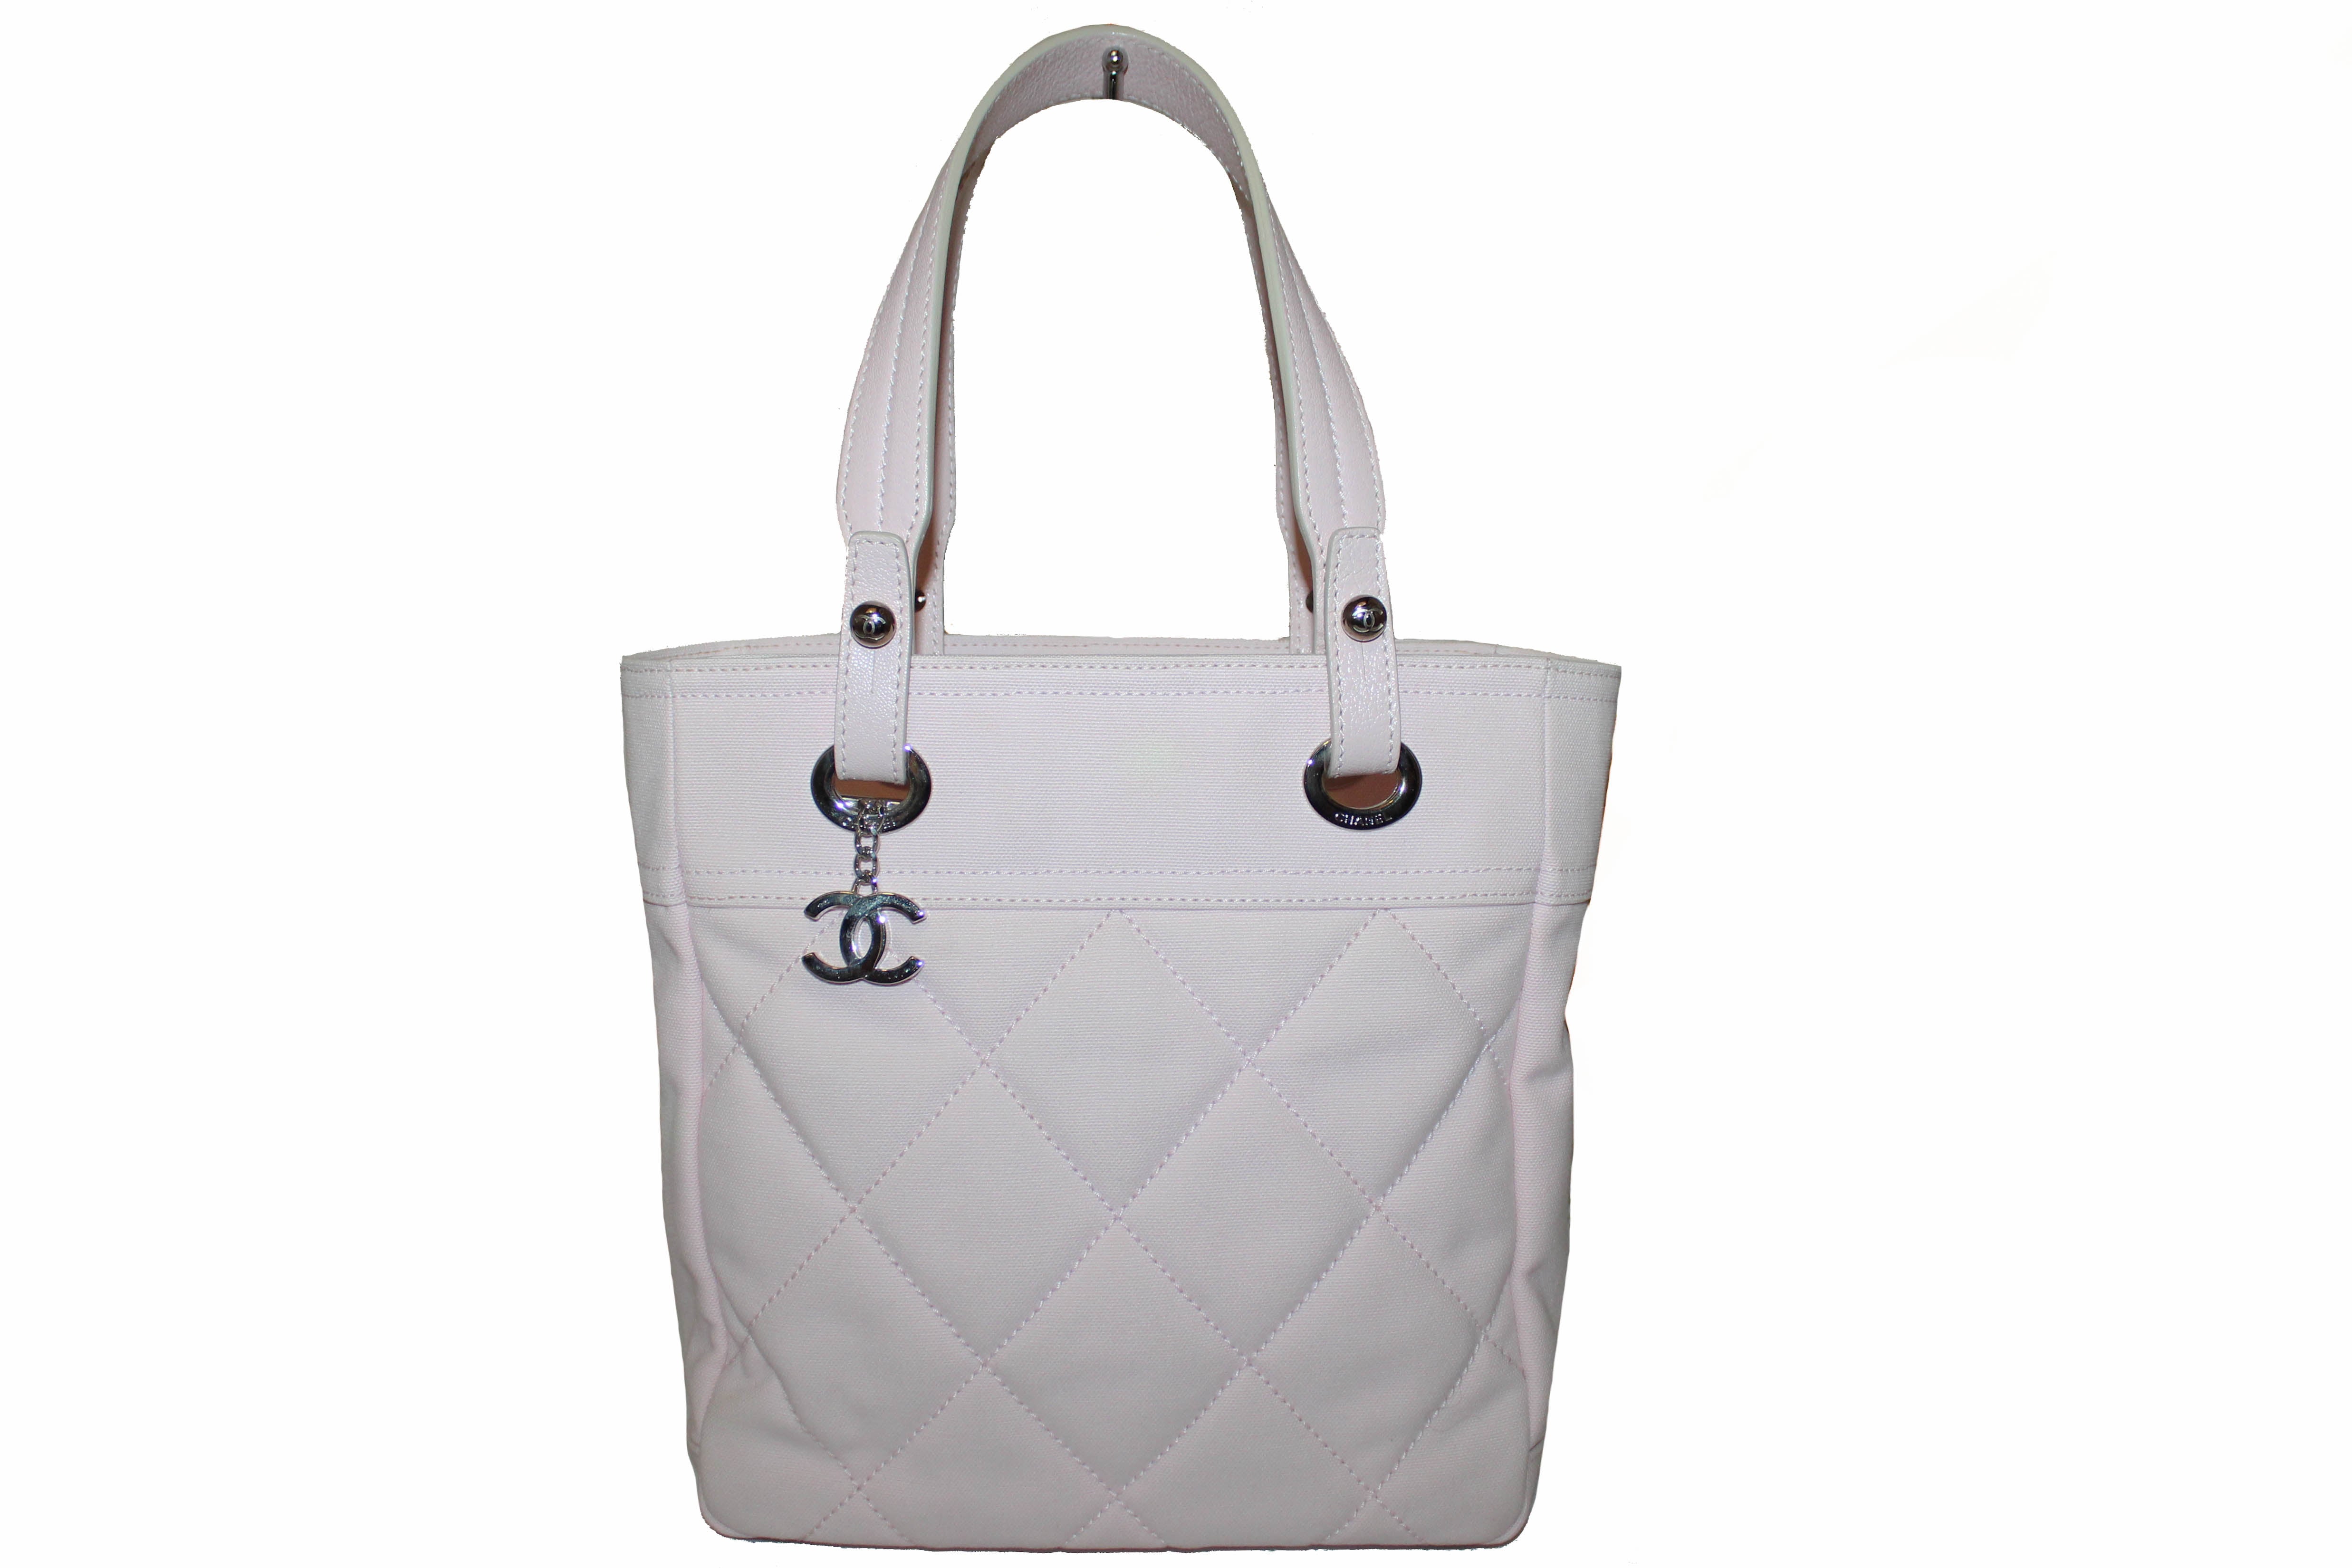 CHANEL, Bags, Chanel Canvas Tote Bag